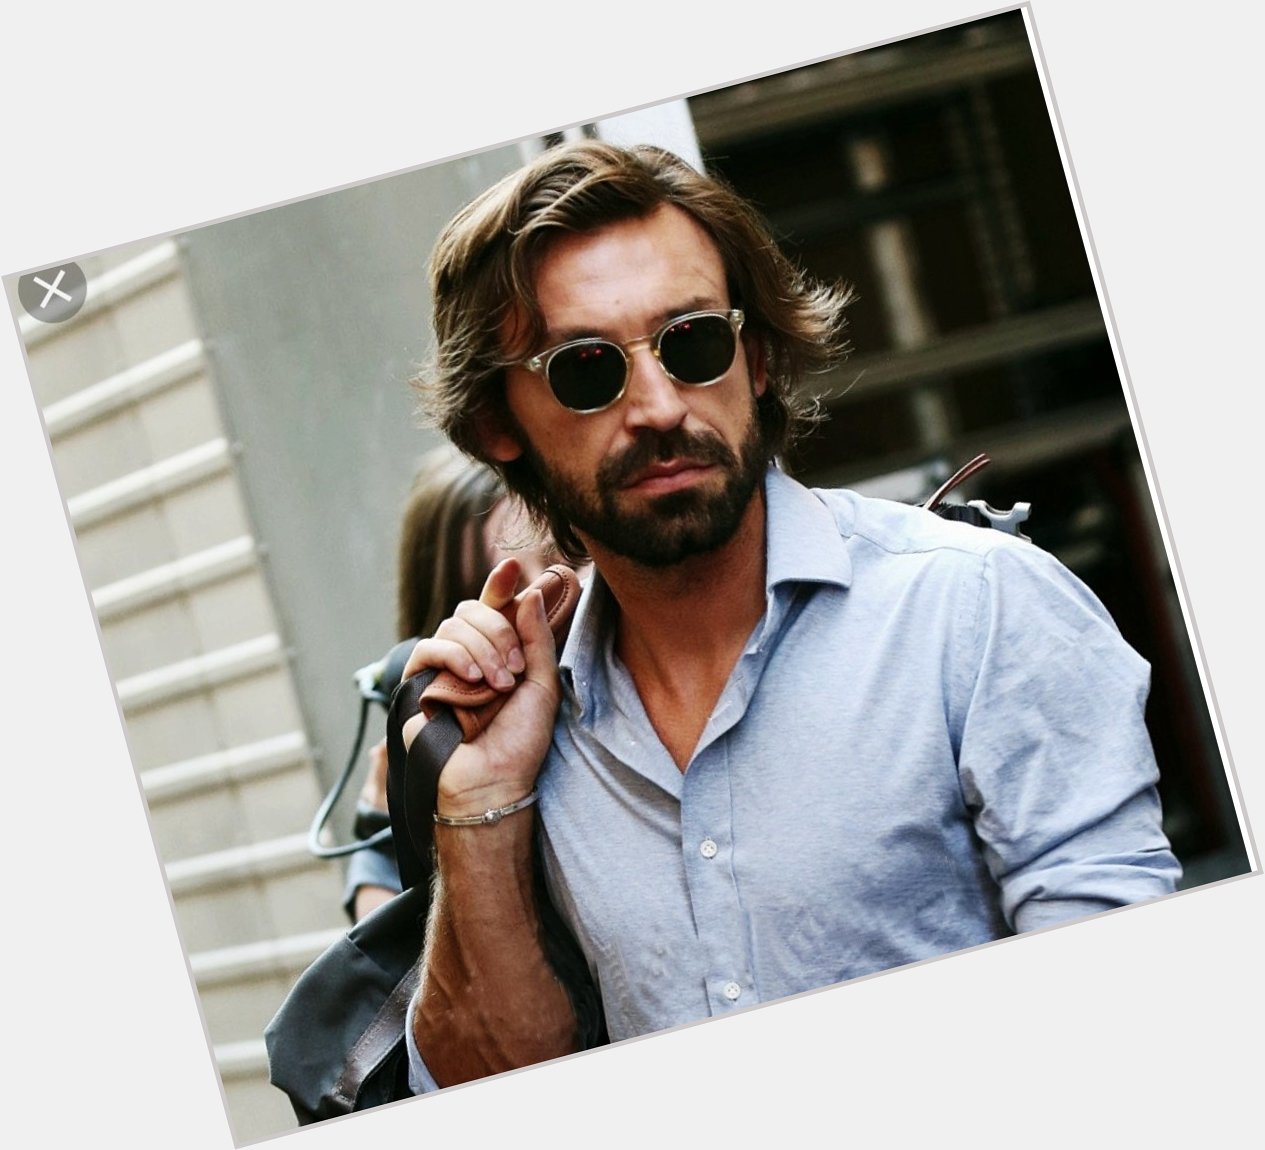 Happy 40th birthday to the eternally classy Andrea Pirlo. Ages like fine wine. 